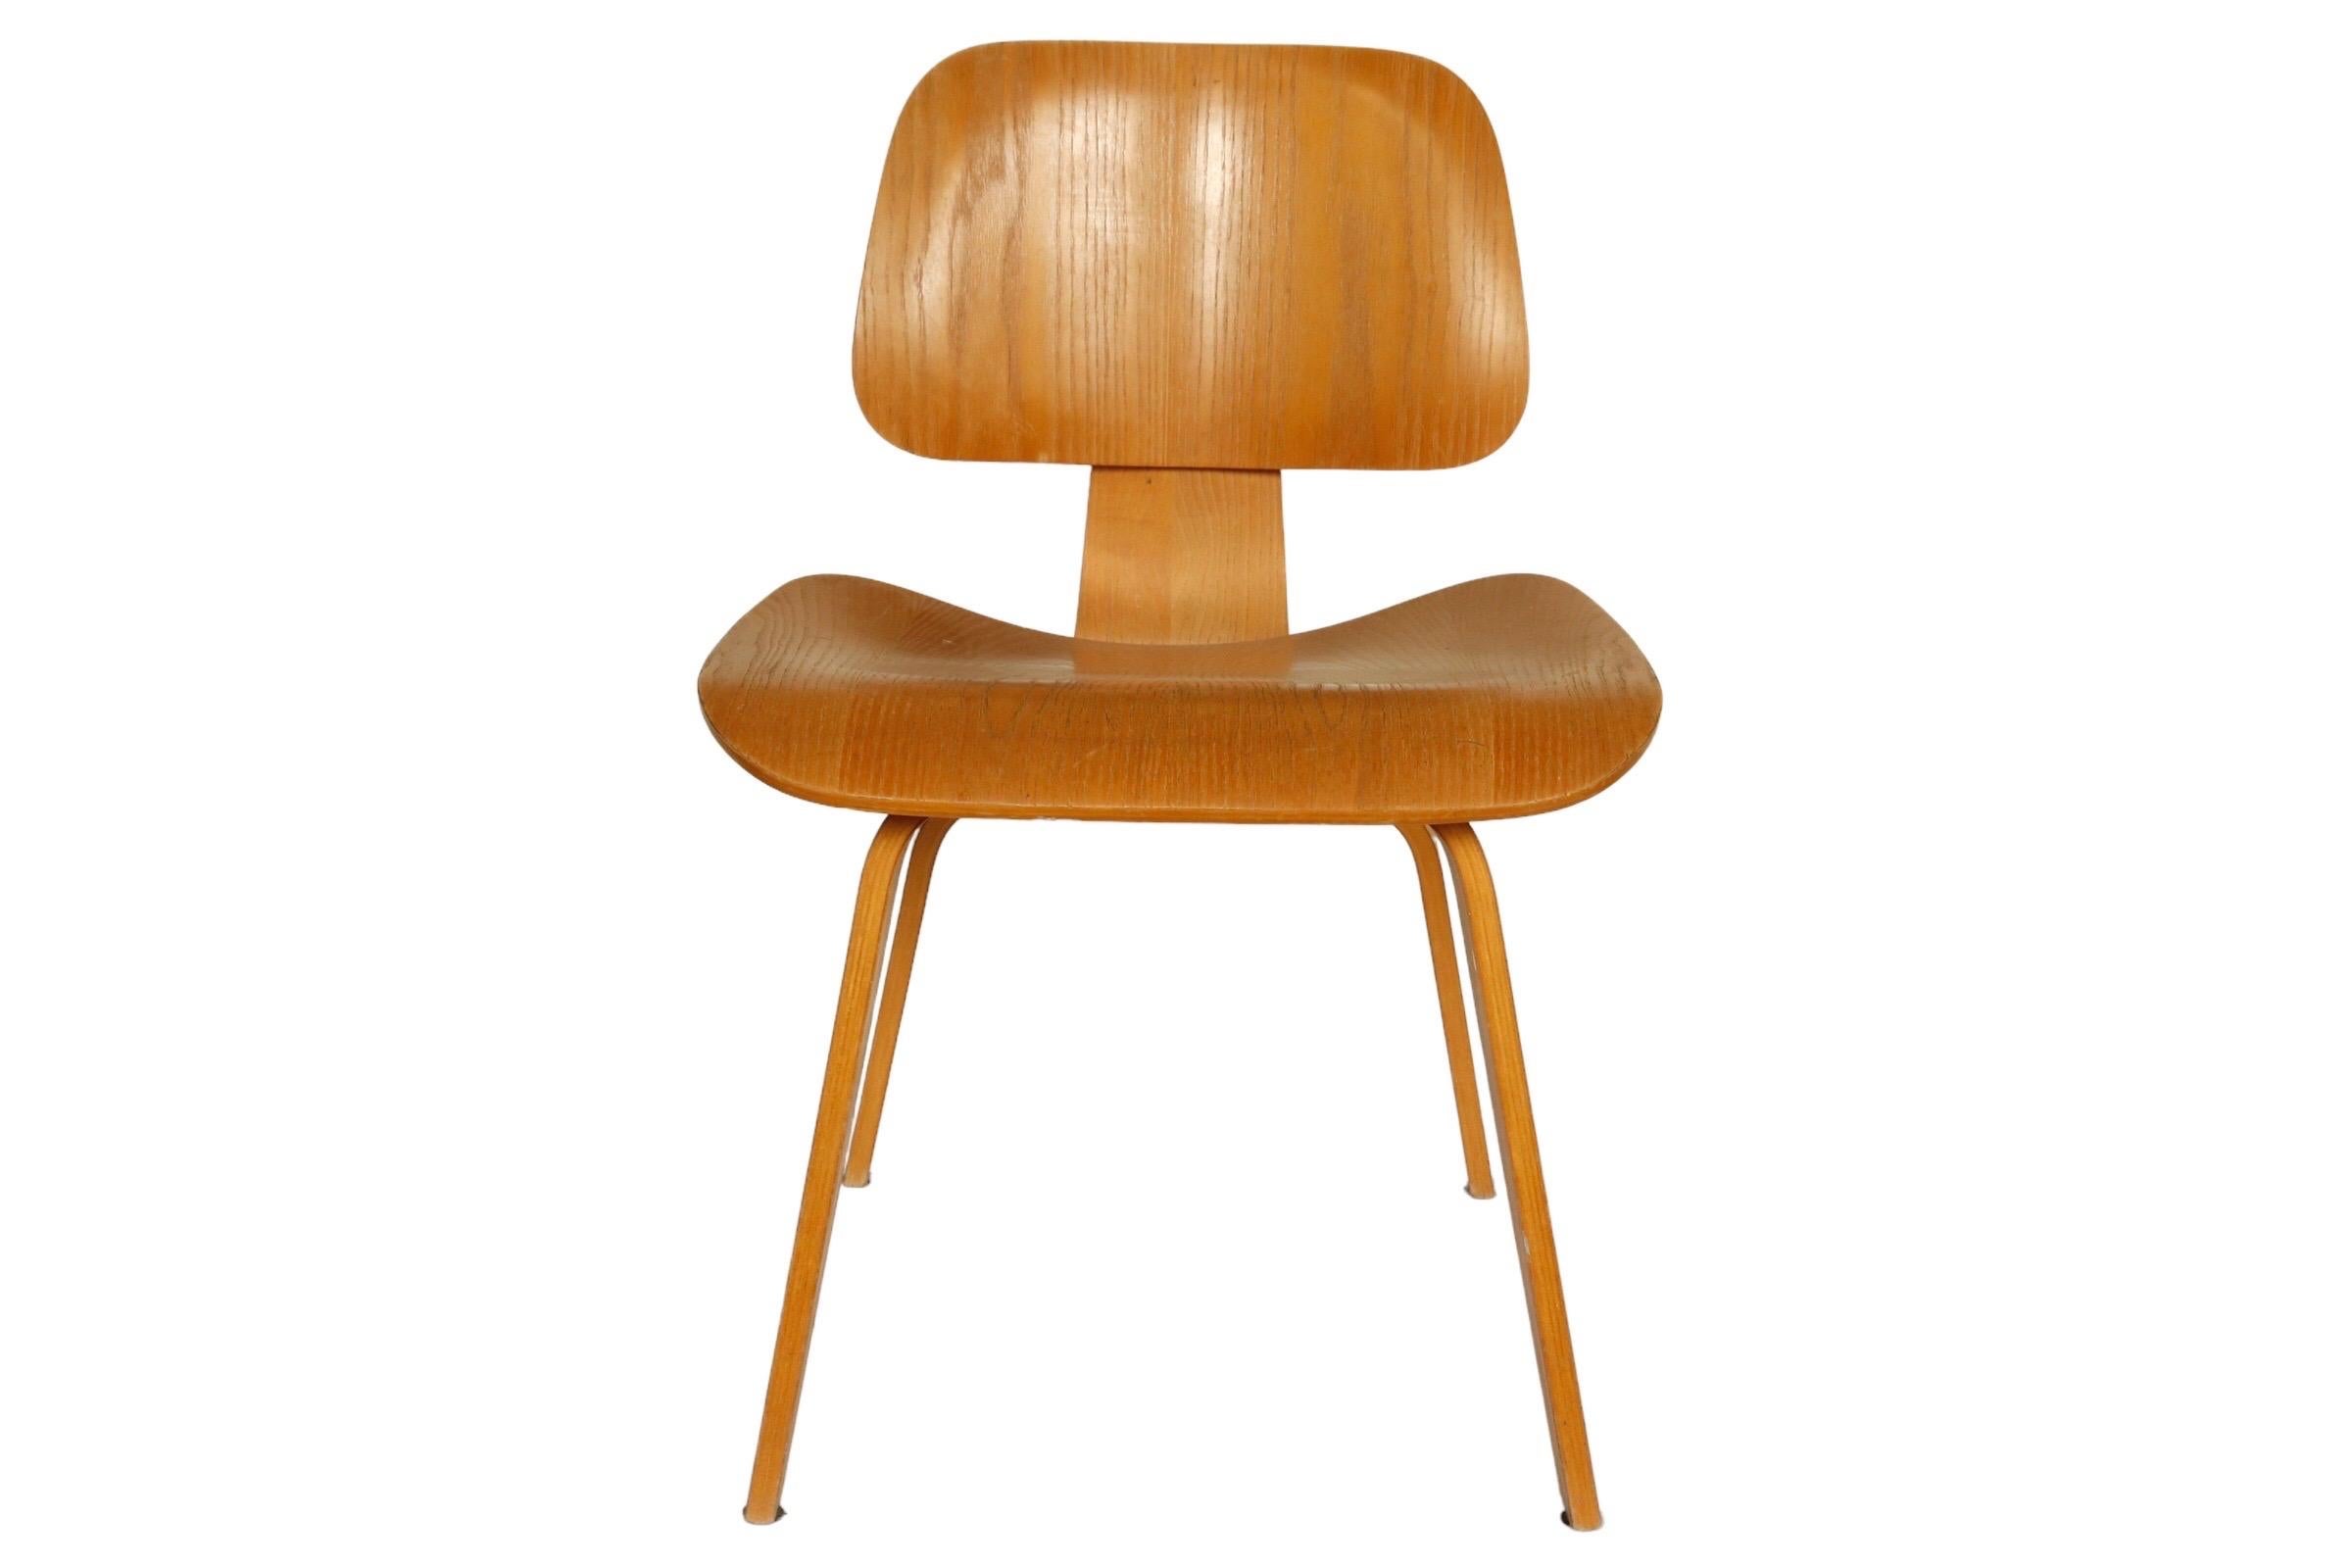 A pair of vintage original DCW chairs, designed by Charles and Ray Eames for Herman Miller. 

Early 21st century.

Molded plywood in a signature profile.

Legs and seat edges are clean with no major chips. Structurally sound shock mounts are